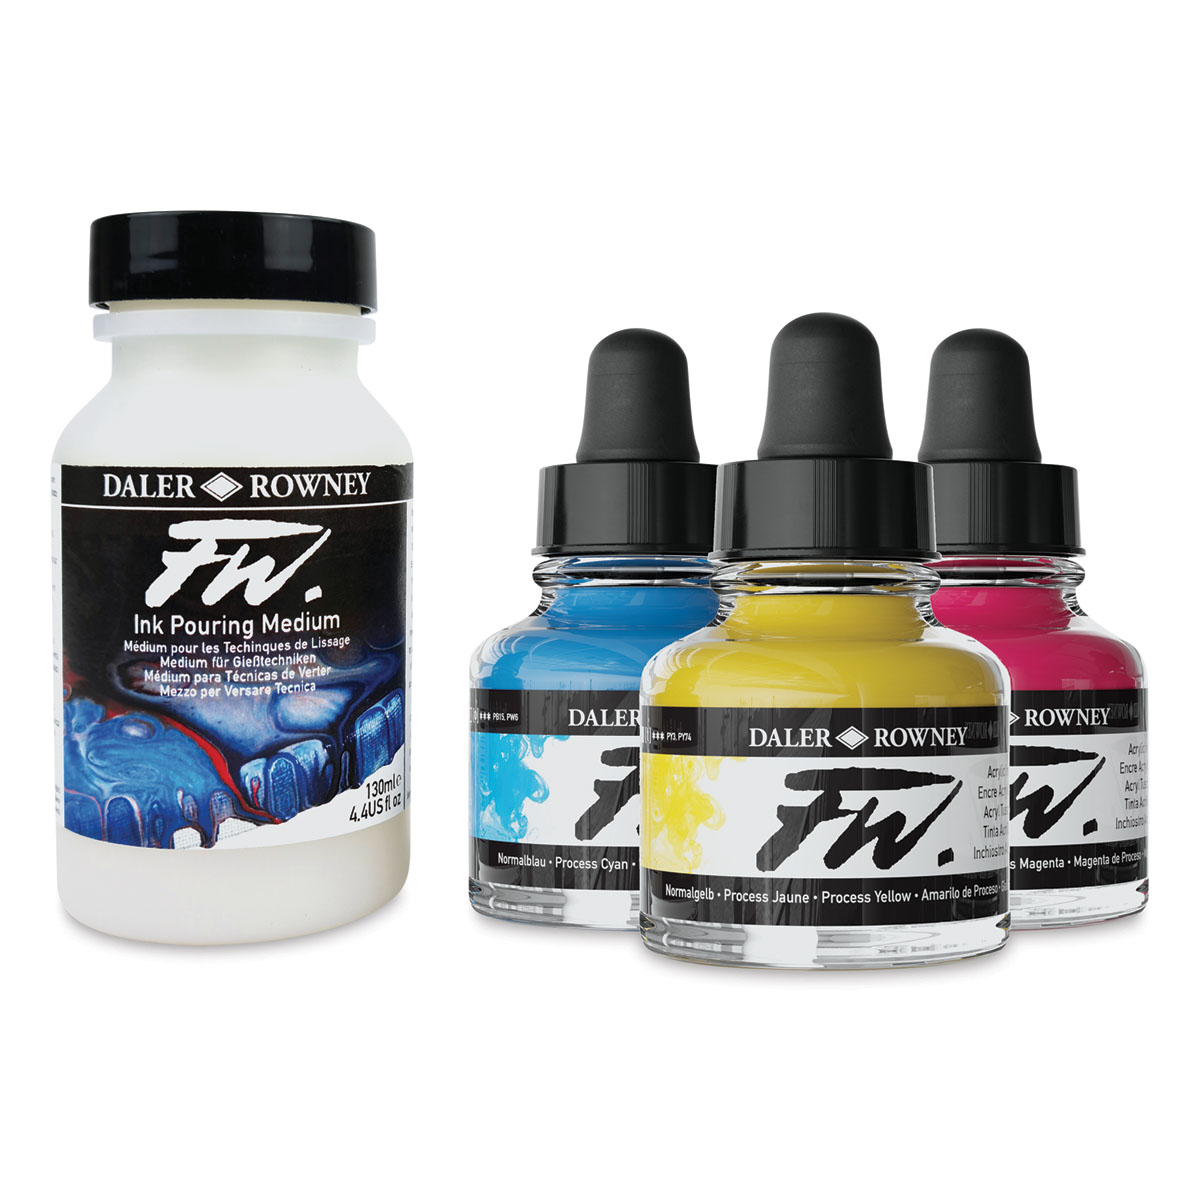 Daler-Rowney FW Acrylic Ink Bottle 3-Color Starter Set with Empty Marker -  Acrylic Set of Drawing Inks for Artists and Students - Art Ink Calligraphy